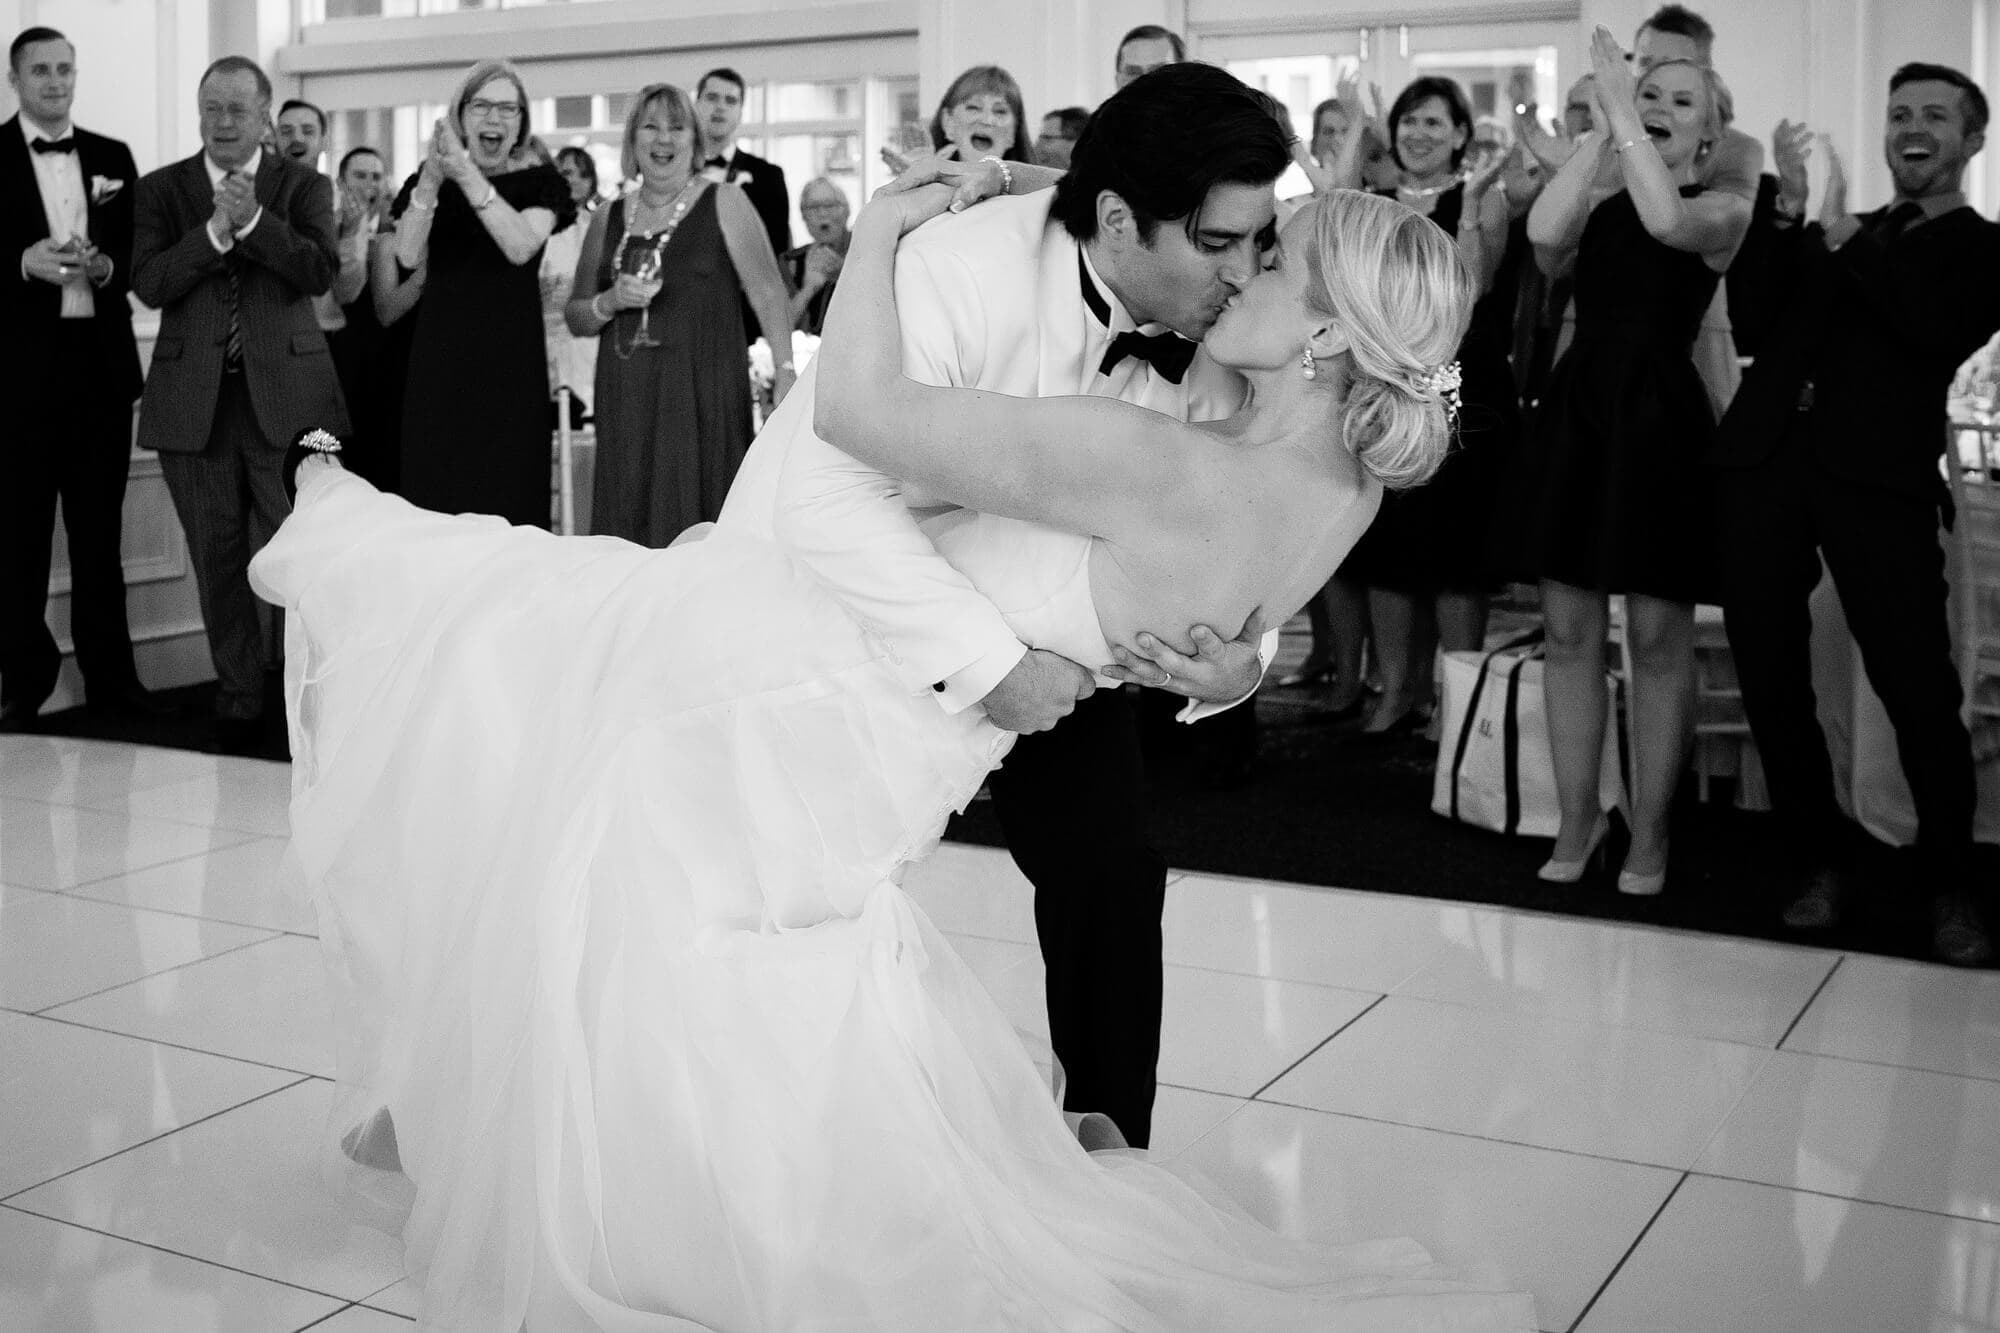 dip at the end of the first dance at boston harbor hotel wedding